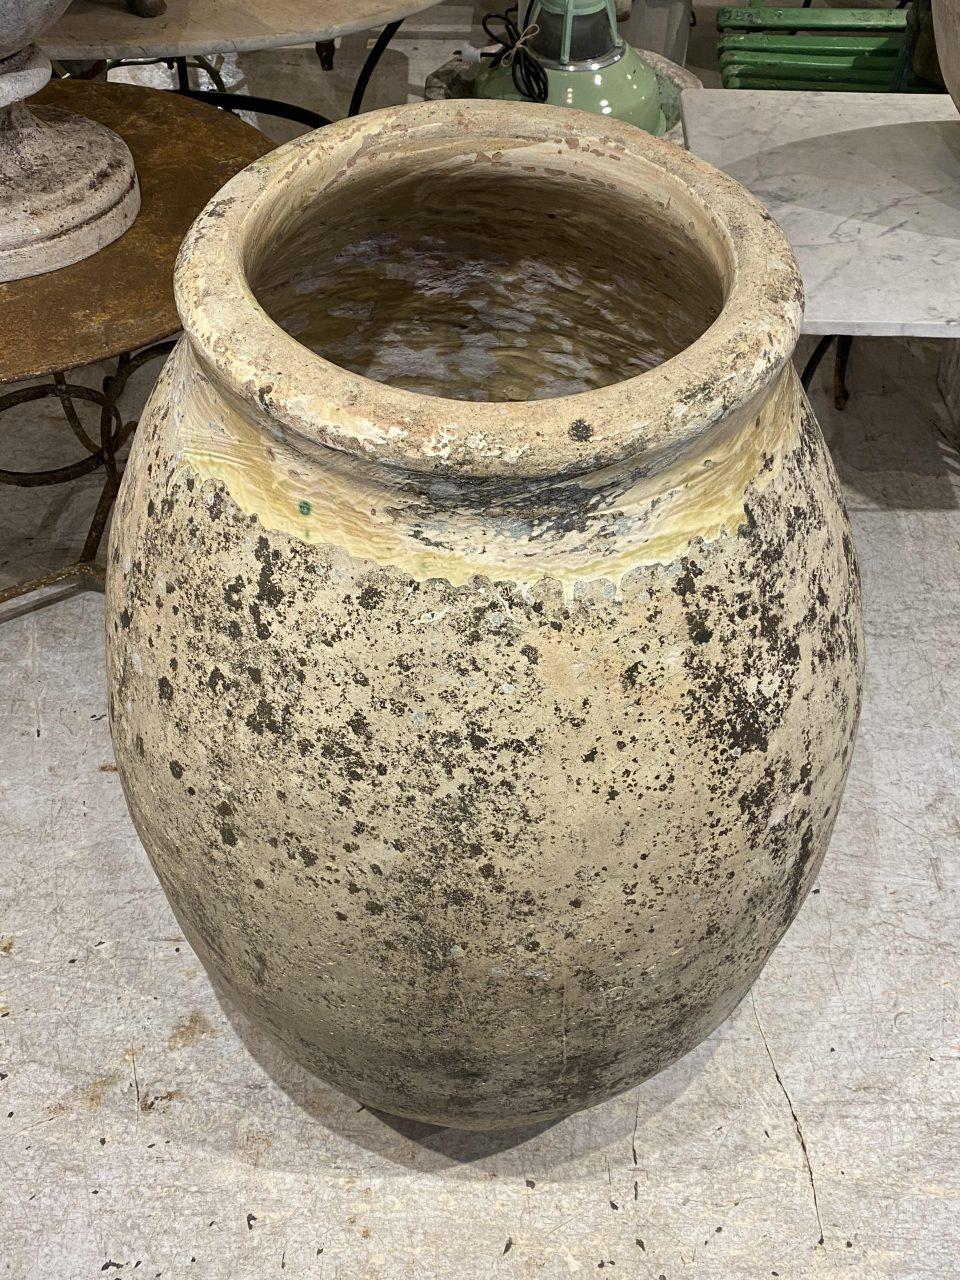 Much coveted gigantic antique storage pottery, pre 1900s.

A unique piece of handmade ceramic craftmanship, made in the cozy southern French city of Biot, located between Nice and Cannes. The city of Biot has had a tradition of producing pottery